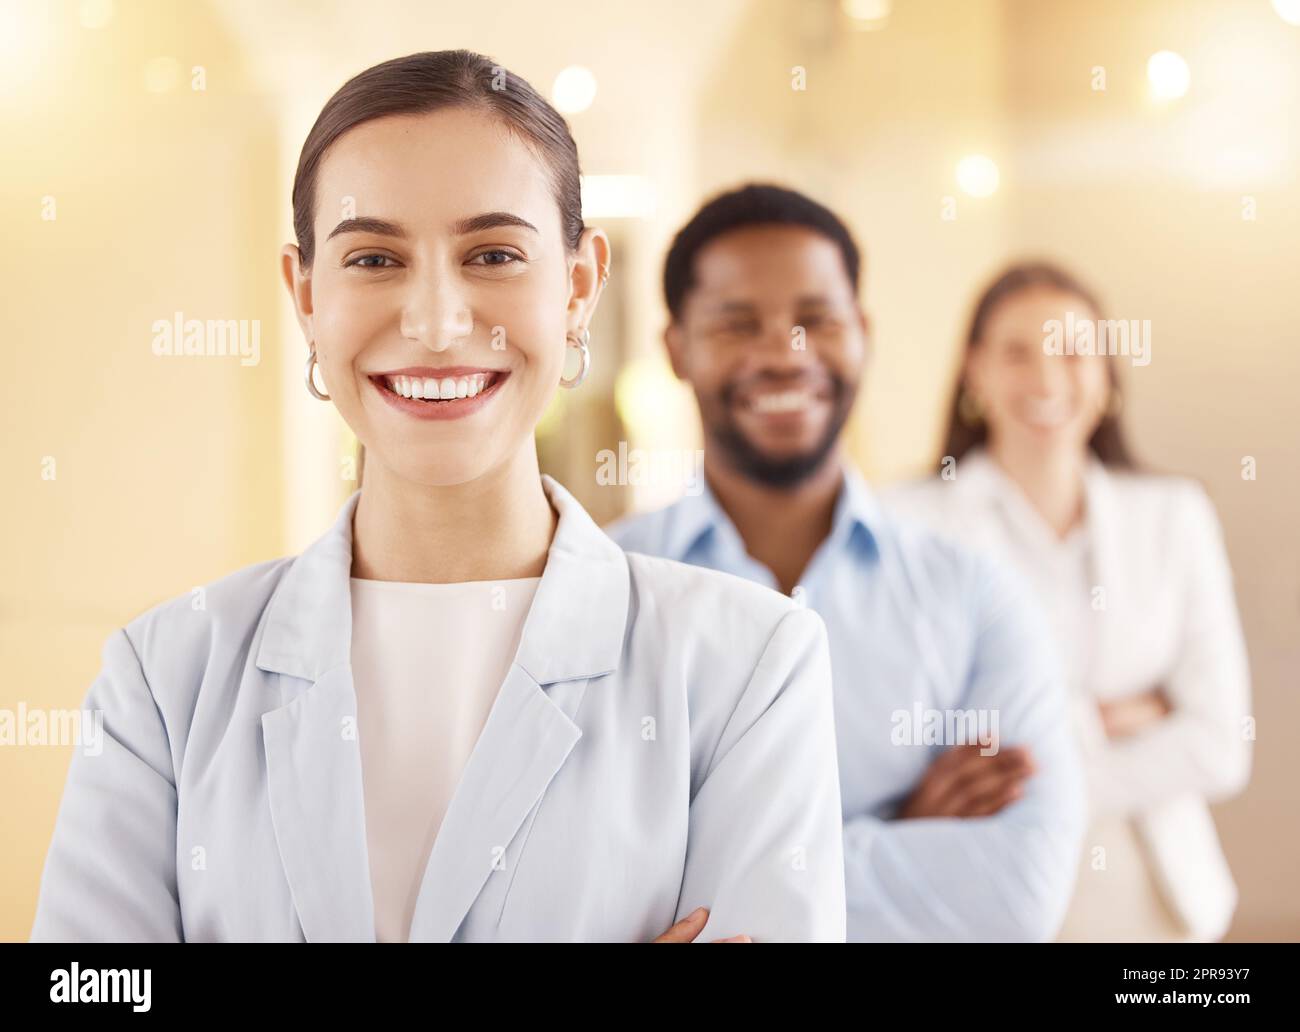 Make the most of your strengths and abilities. Portrait of a young businesswoman standing in an office with her colleagues in the background. Stock Photo